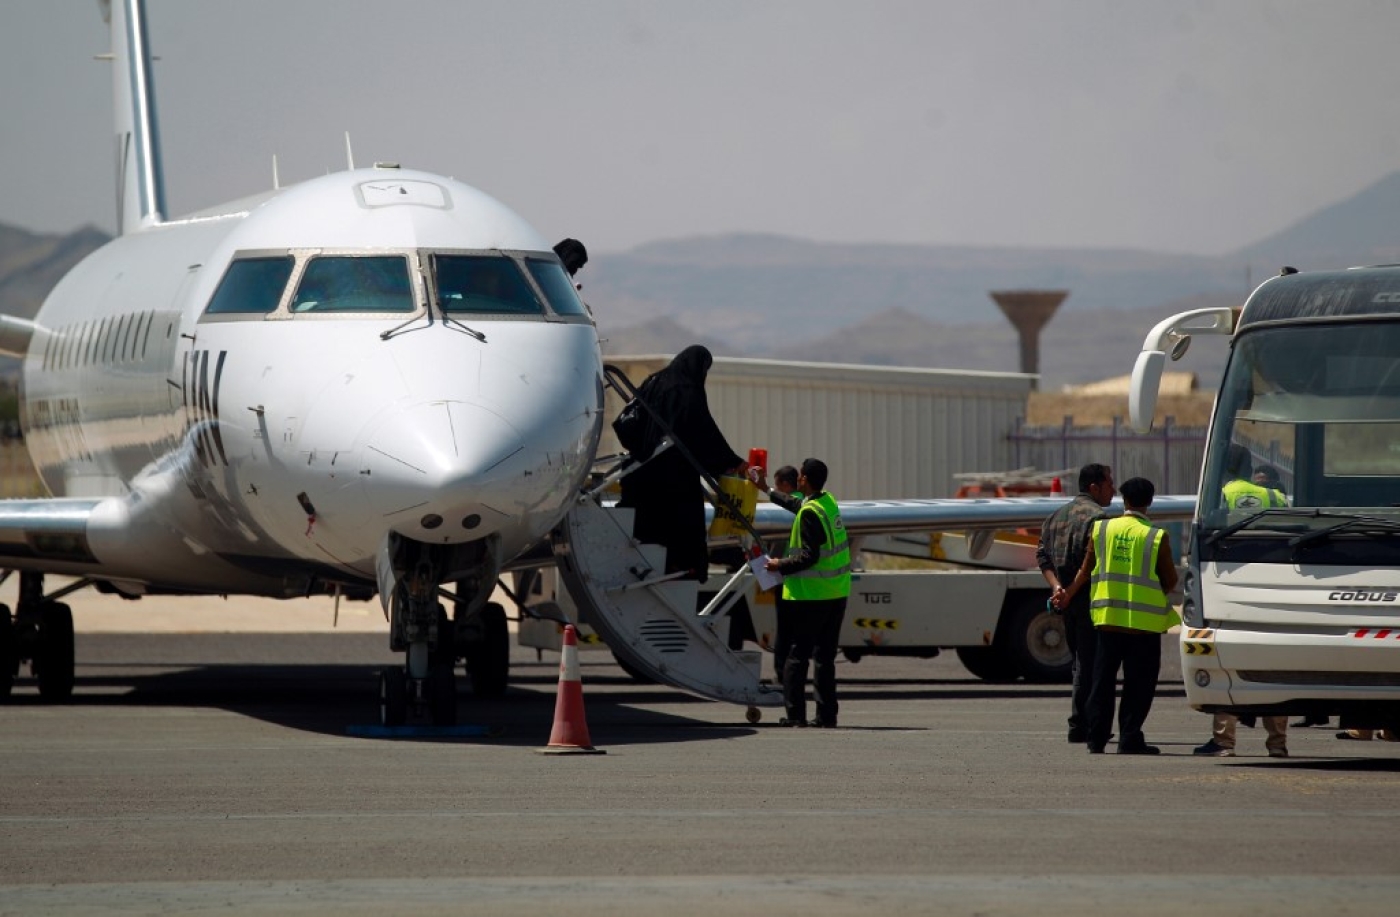 With commercial flights being able to fly from Aden, the US government has stopped offering repatriation flights from Yemen.